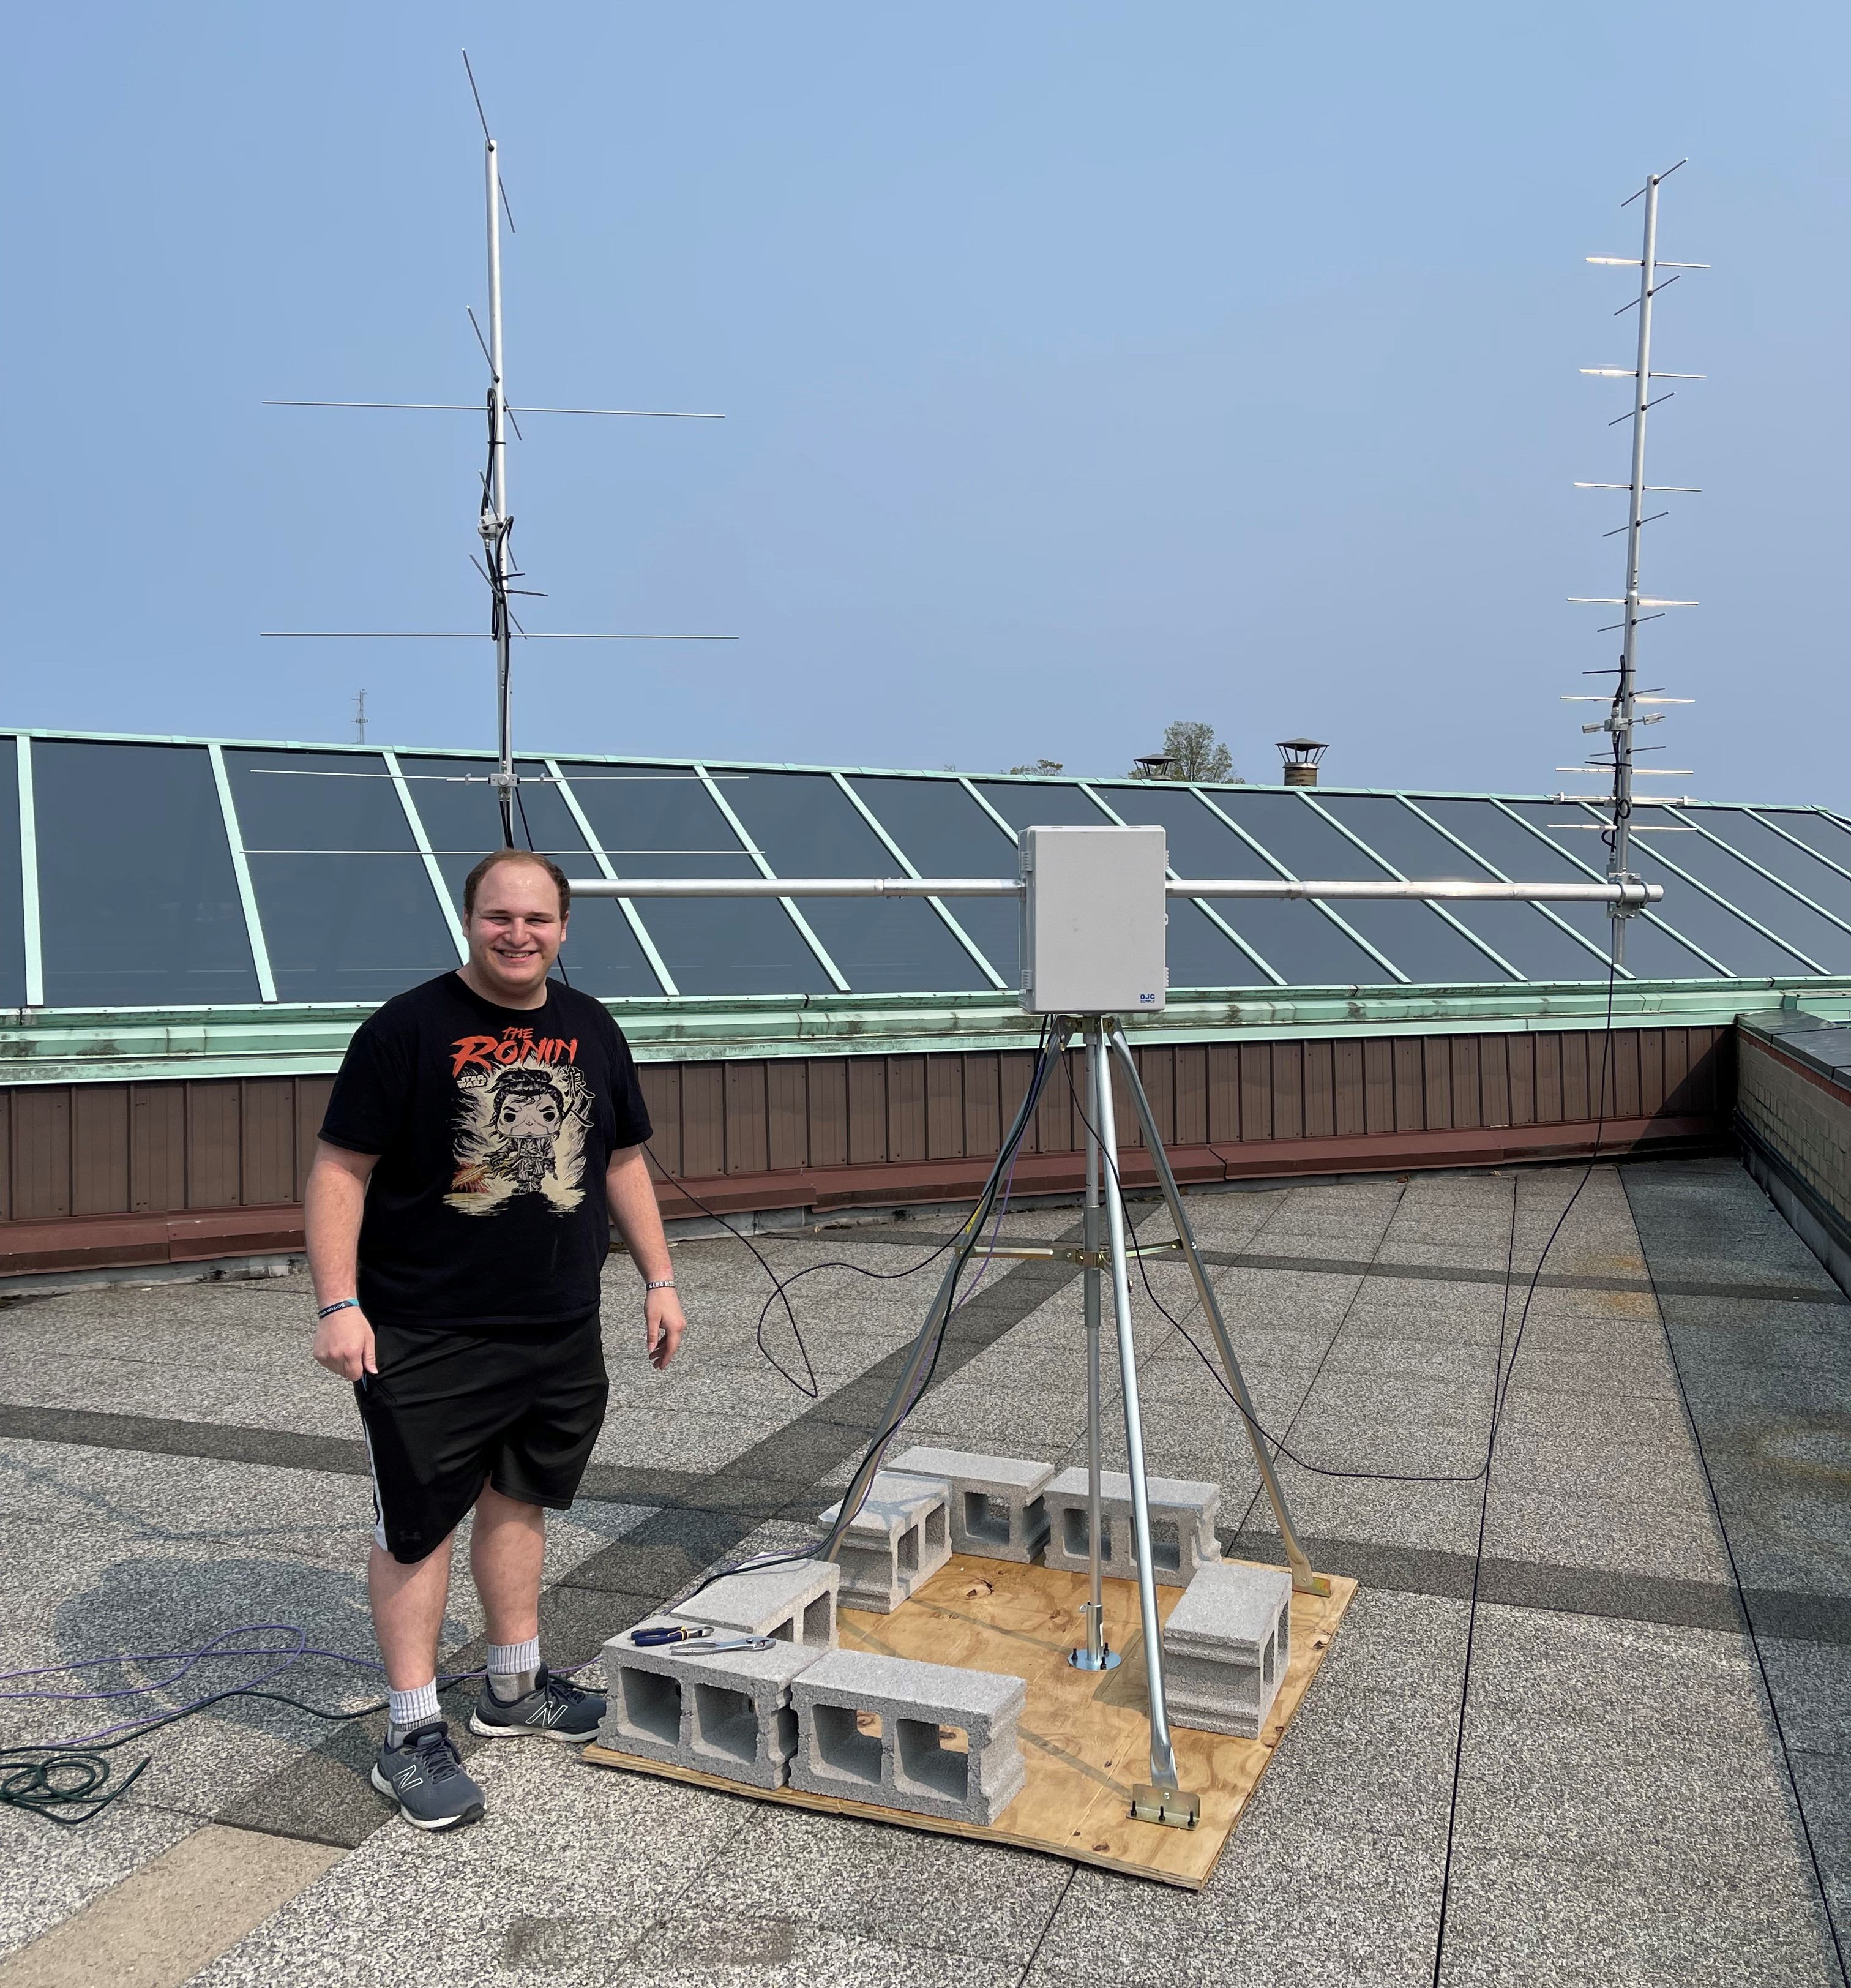 Michael Buchwald stands next to his low-cost university ground station